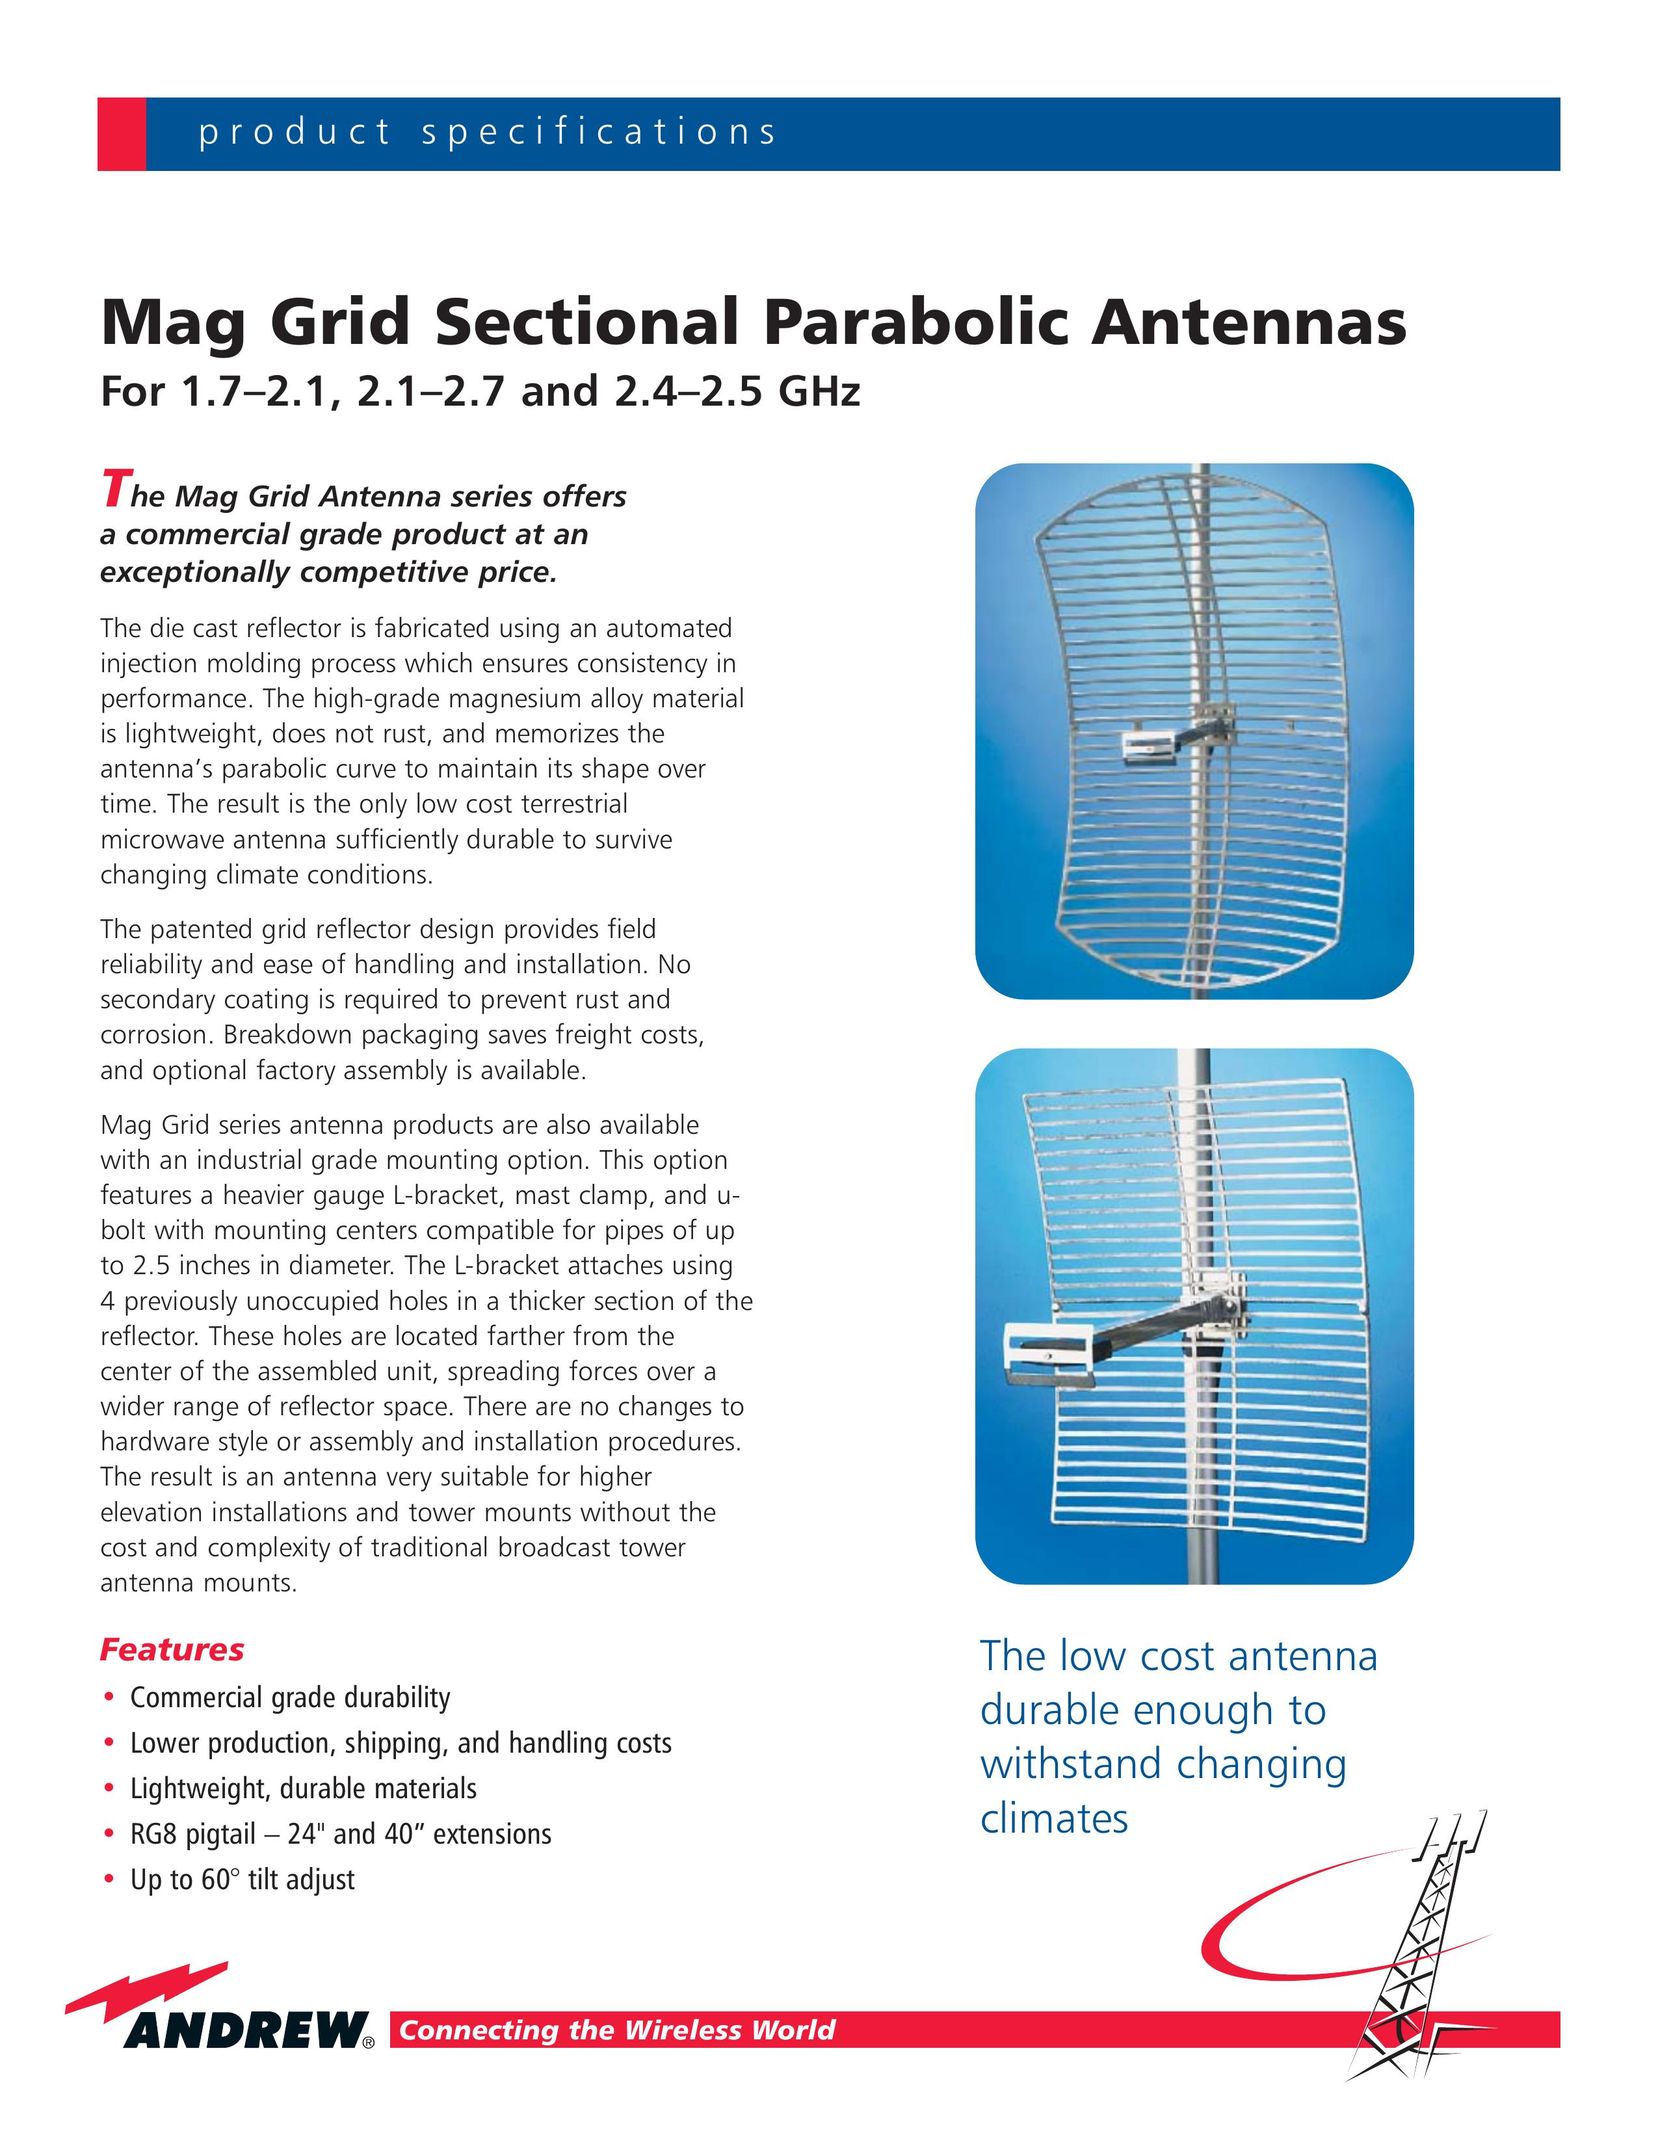 Andrew Grid Sectional Parabolic Antennas Stereo System User Manual